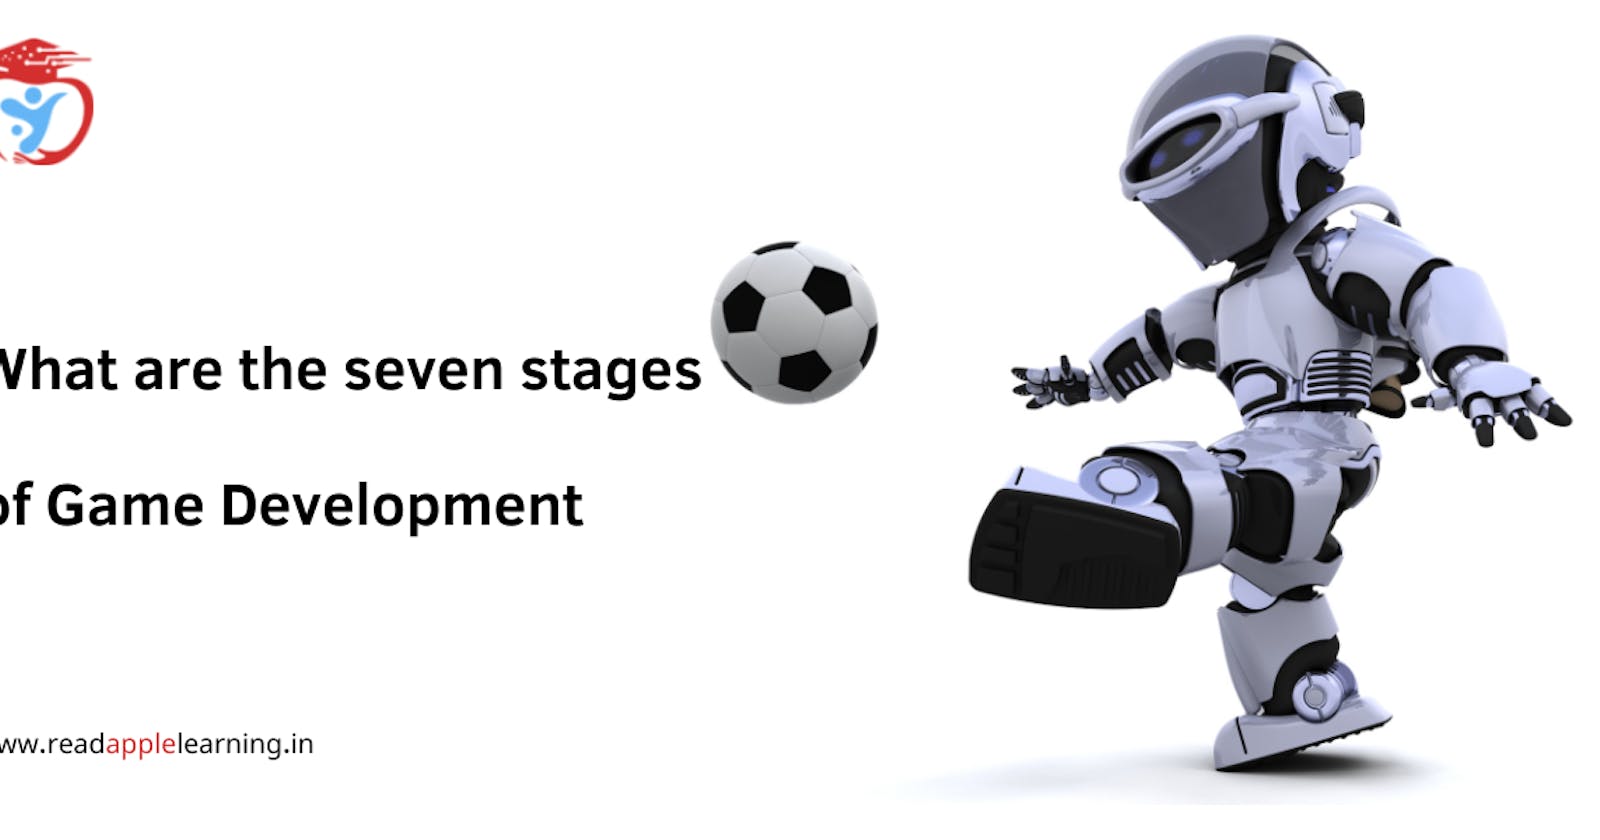 What are the Seven Stages of Game Development?